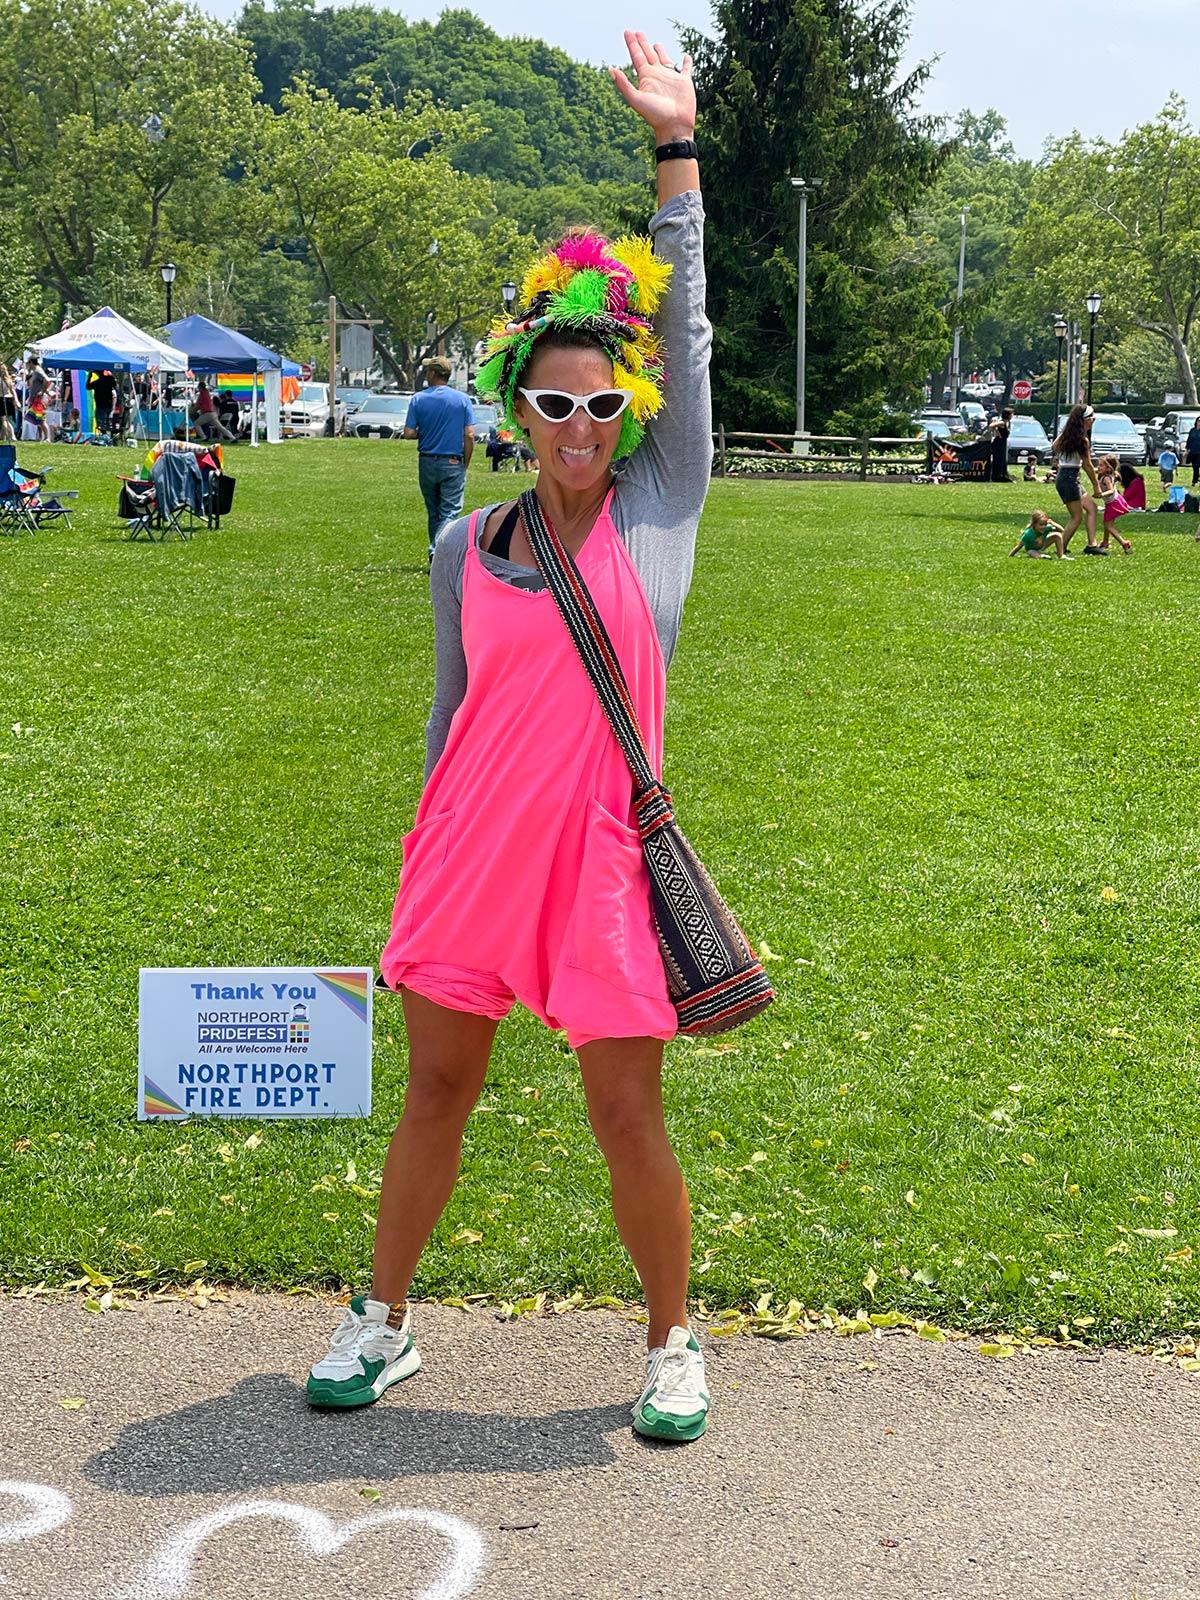 A Pridefest attendee roots on the speakers with joy and enthusiasm.